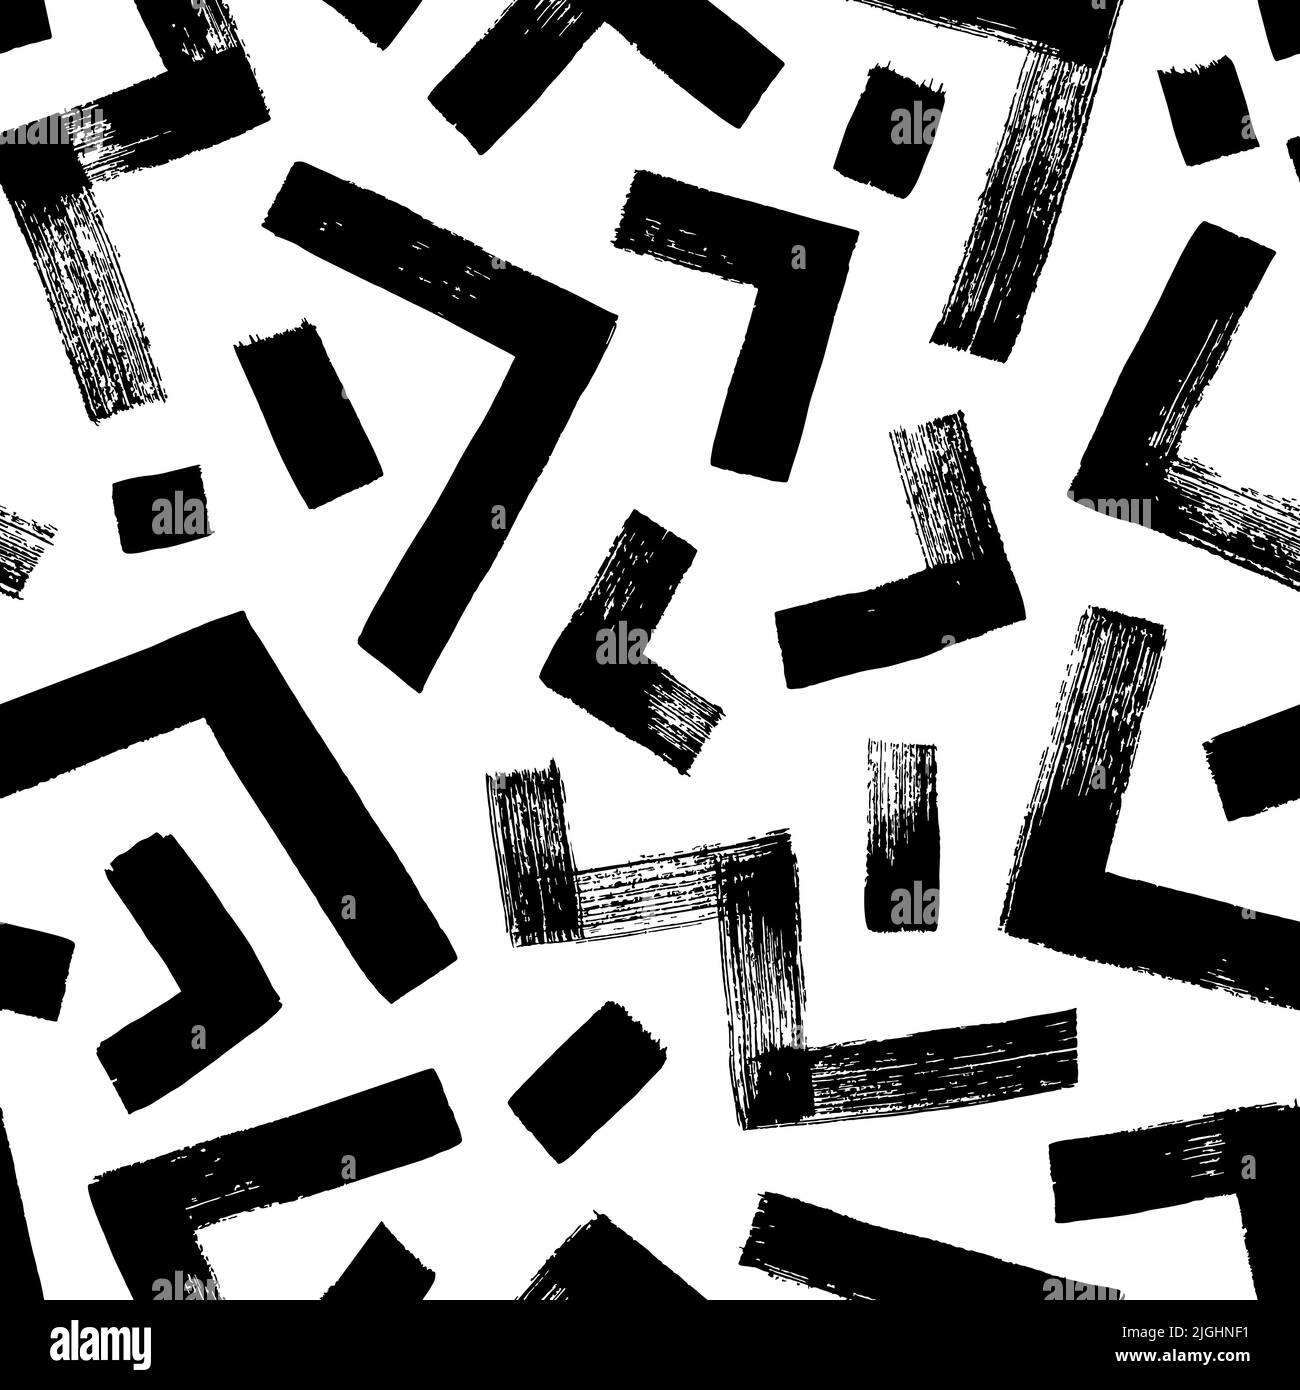 Seamless zig zag pattern in black and white Stock Vector by ©nikolae  65362803